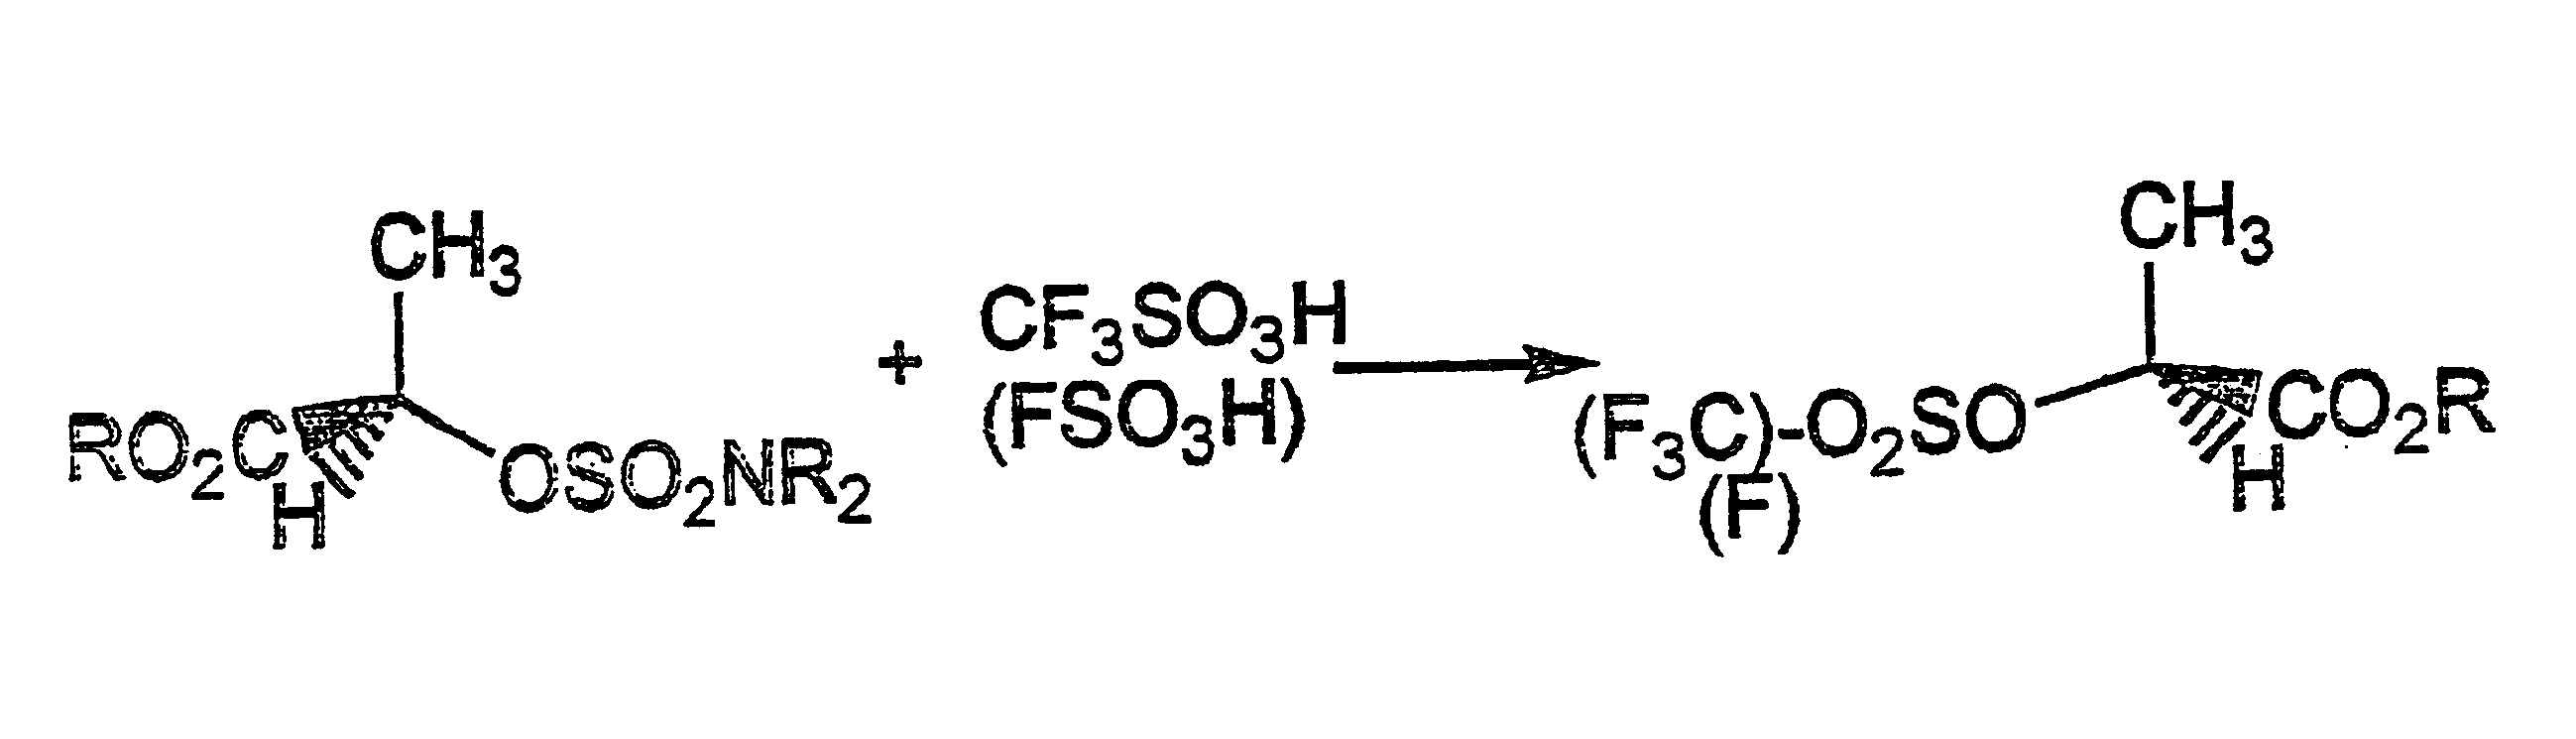 Conversion of a hydroxy group in certain alcohols into a fluorosulfonate ester or a trifluoromethylsulfonate ester